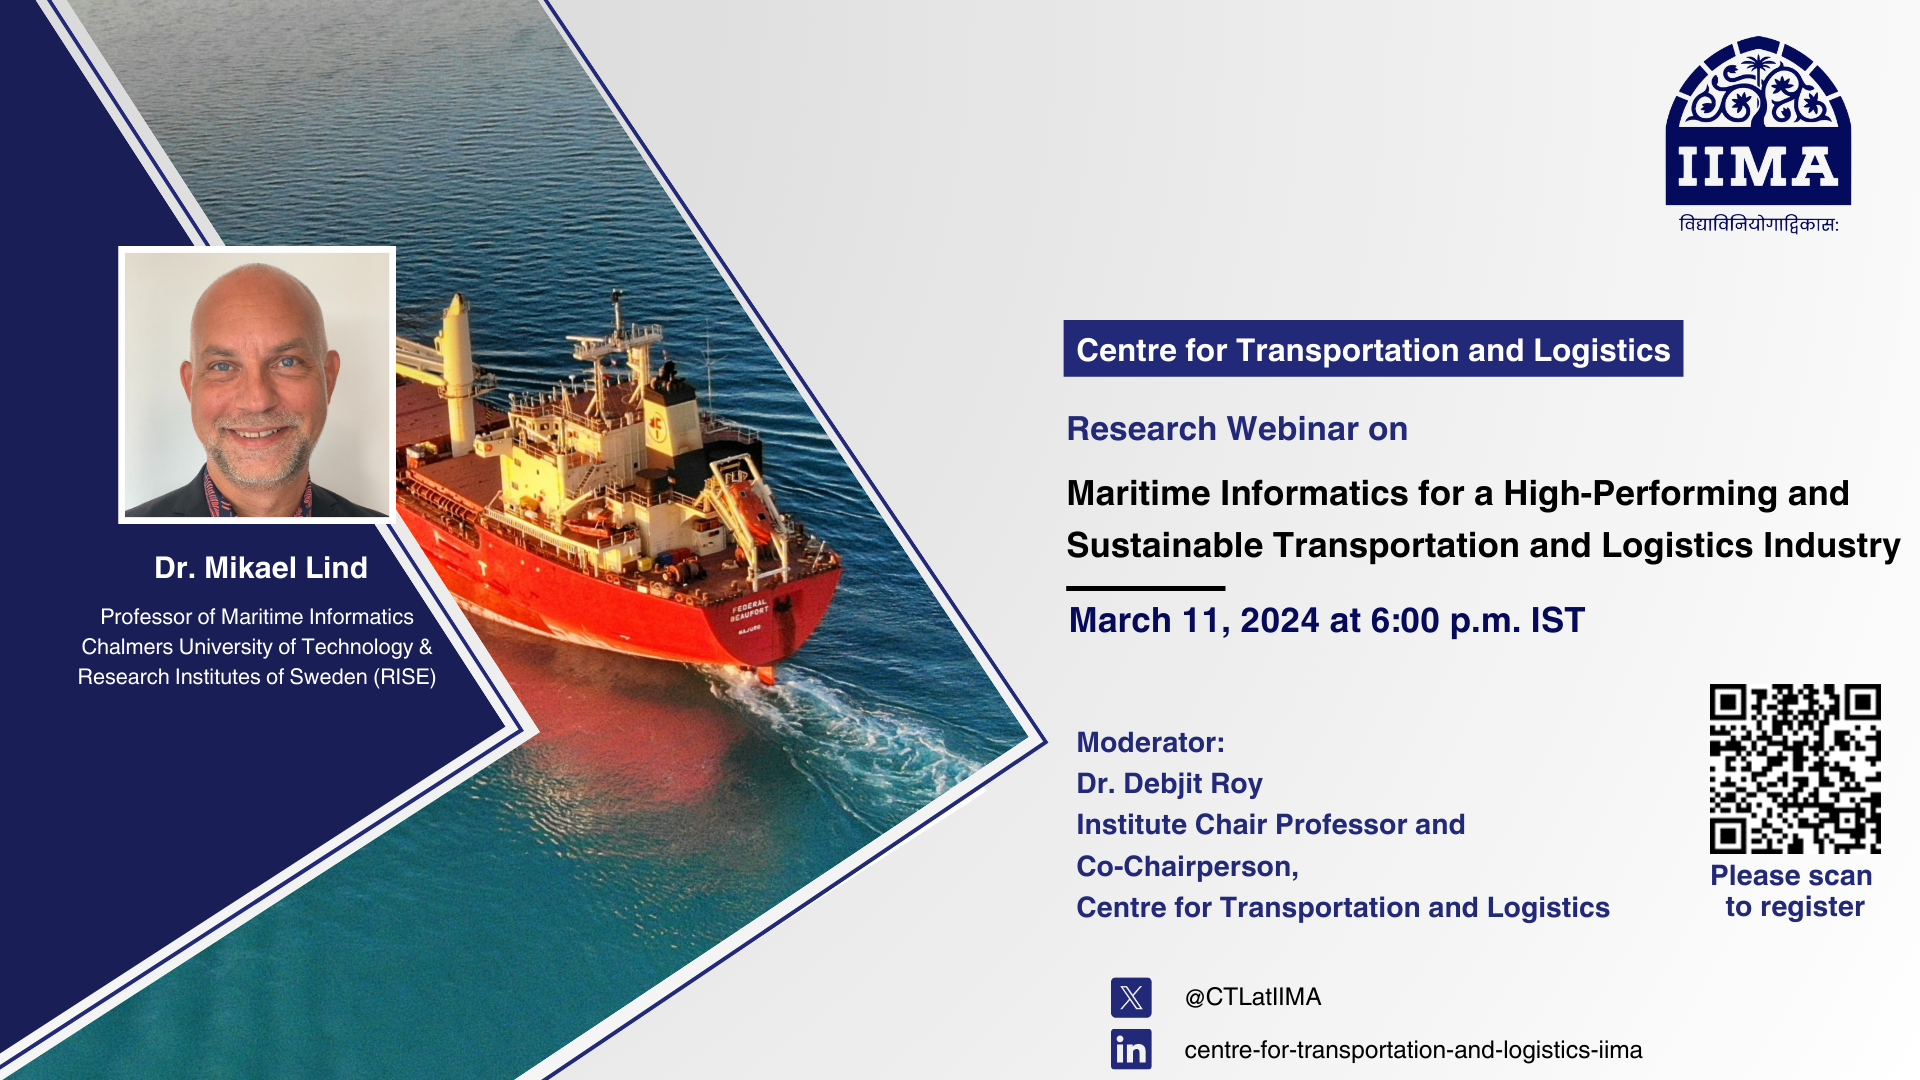 Maritime Informatics for a High-Performing and Sustainable Transportation and Logistics Industry